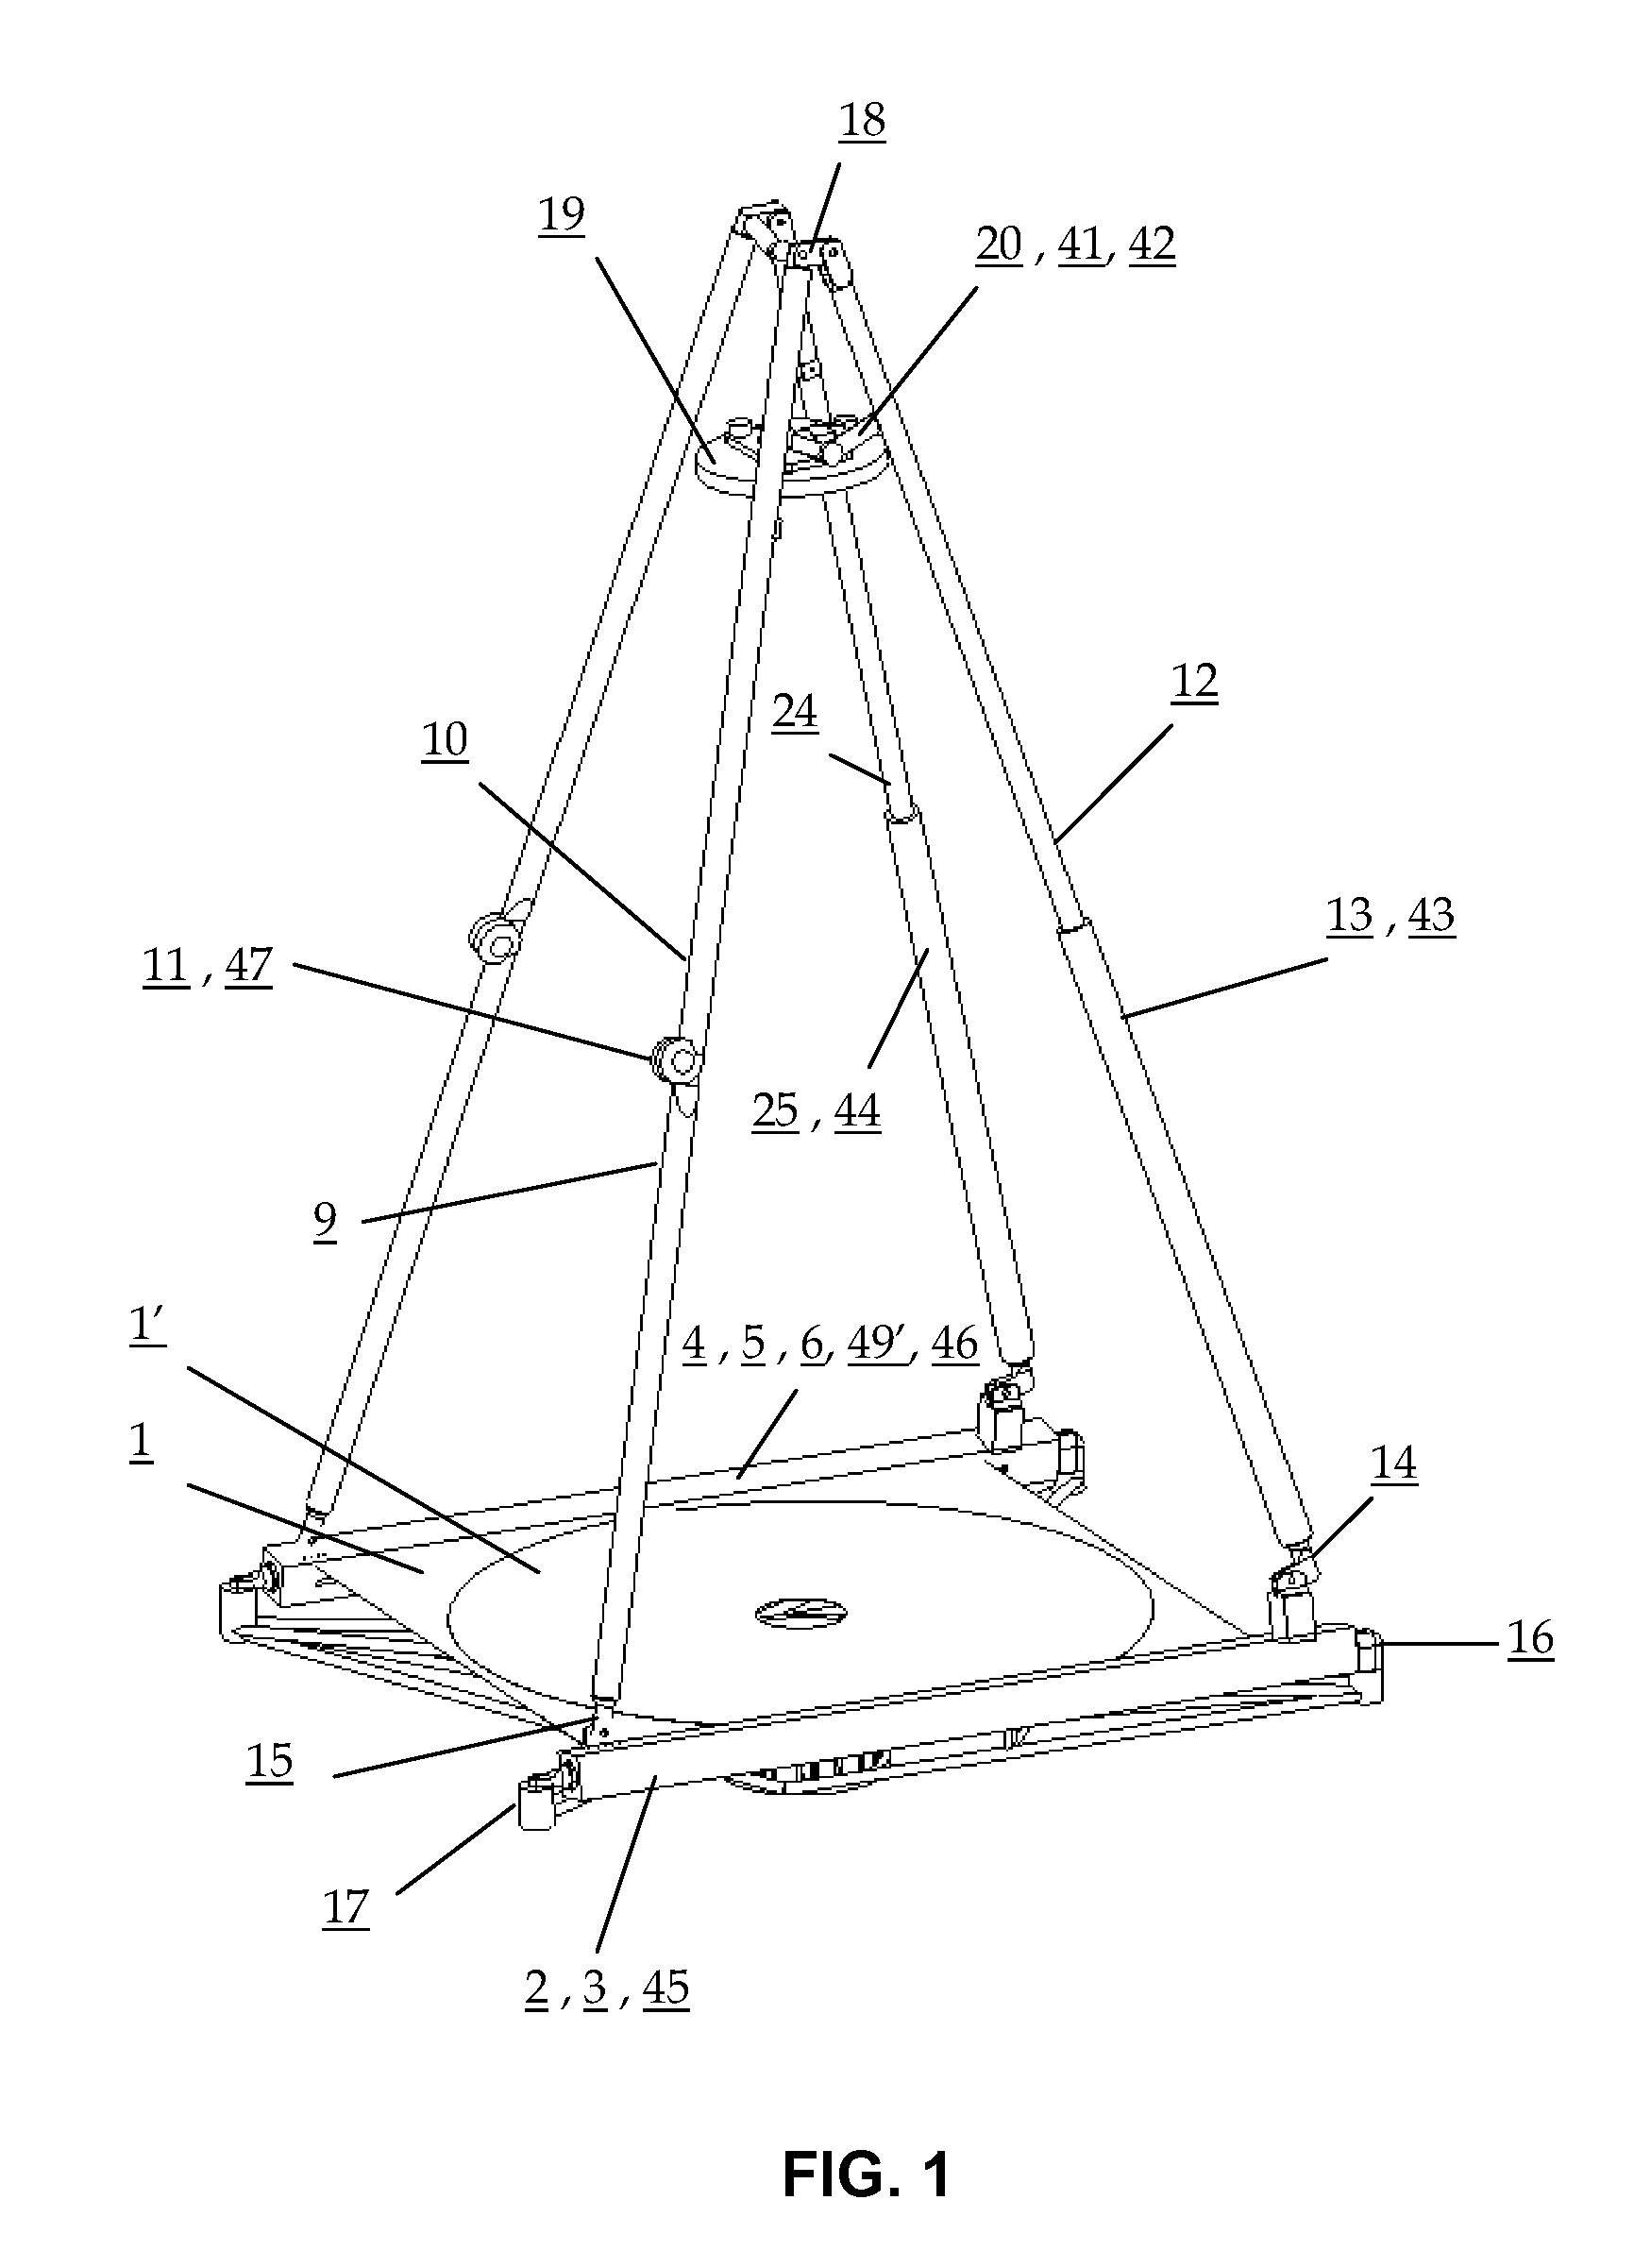 Deployable telescope having a thin-film mirror and metering structure